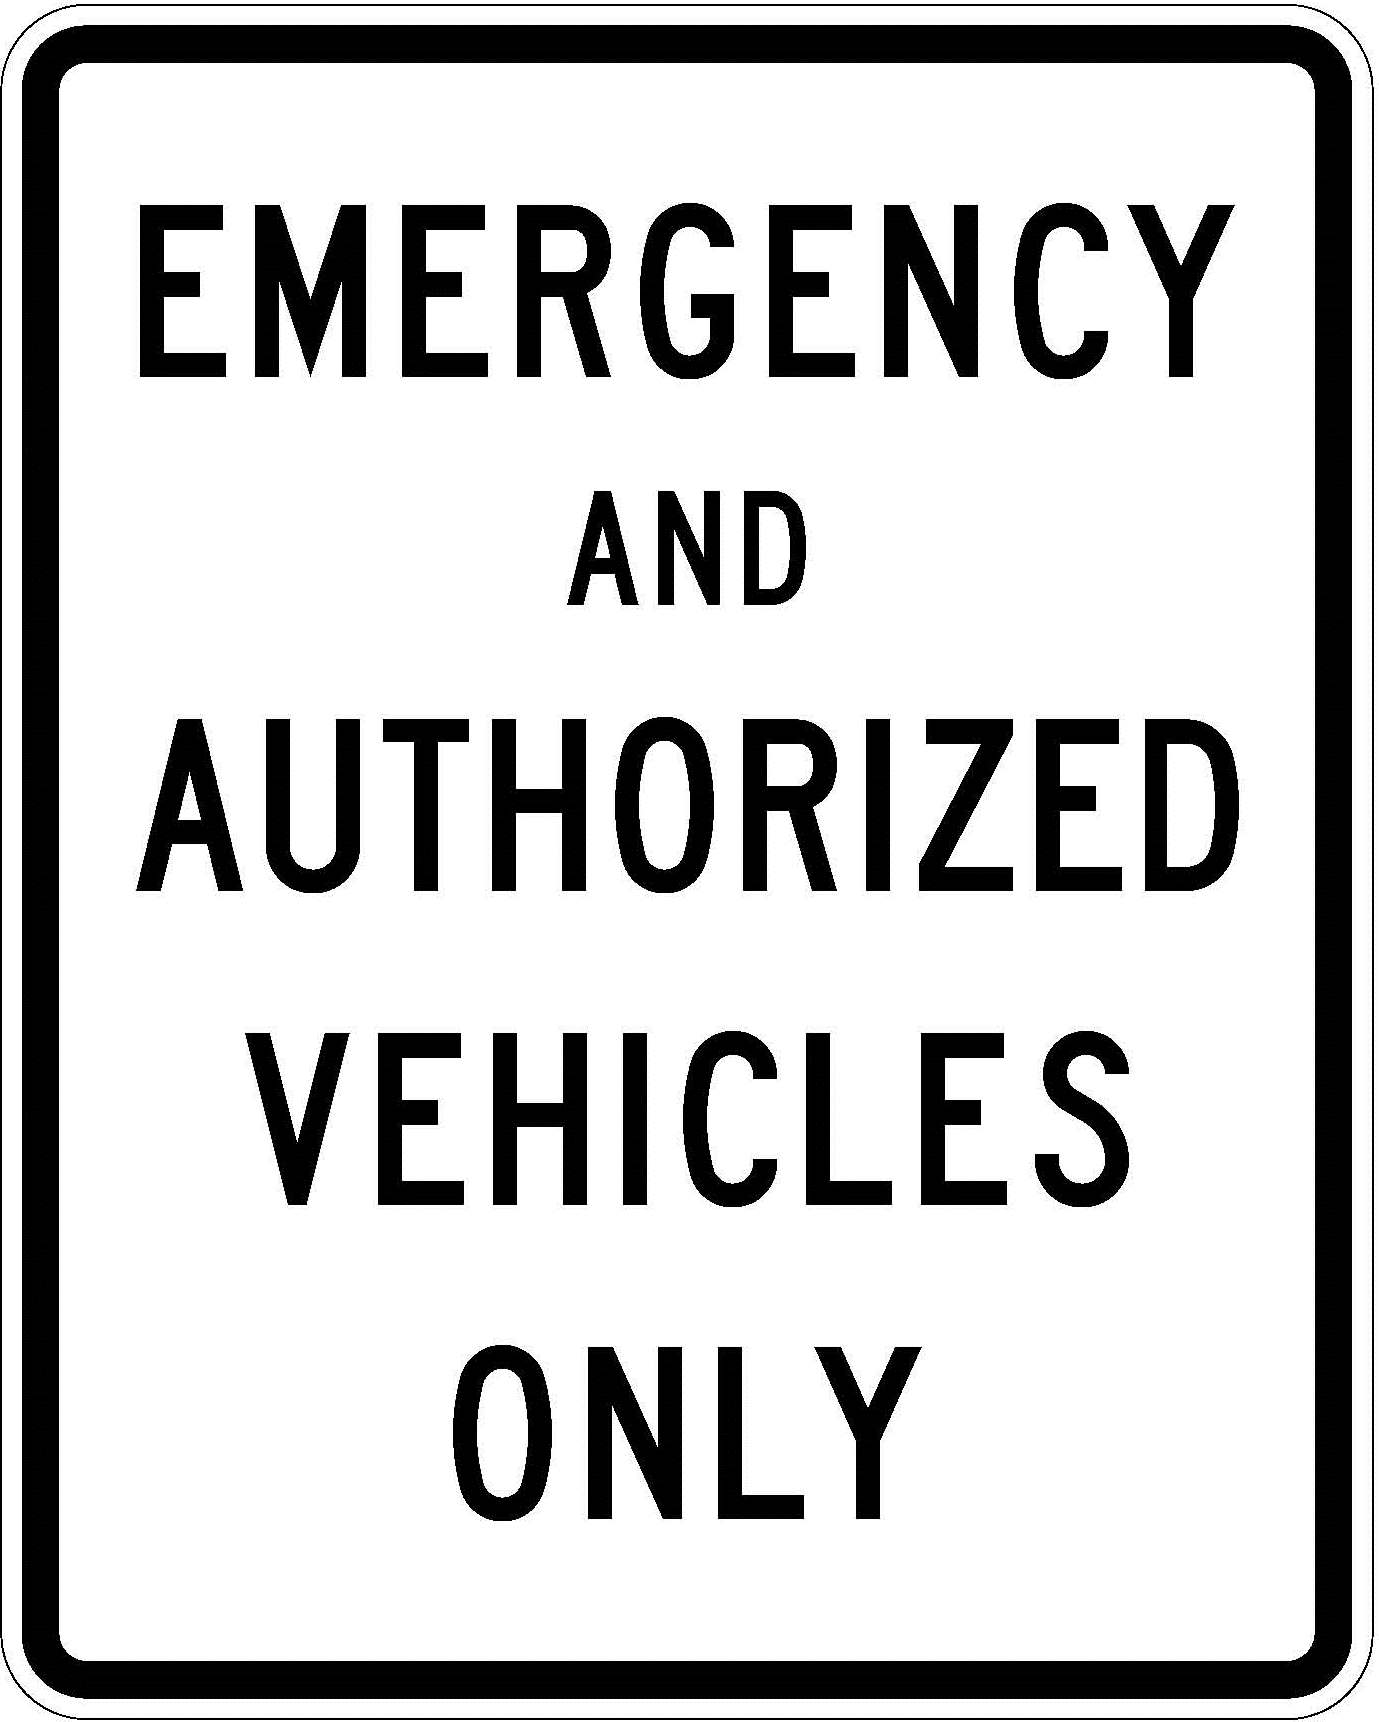 R11-50 Emergency And Authorized Vehicles Only JPEG detail image